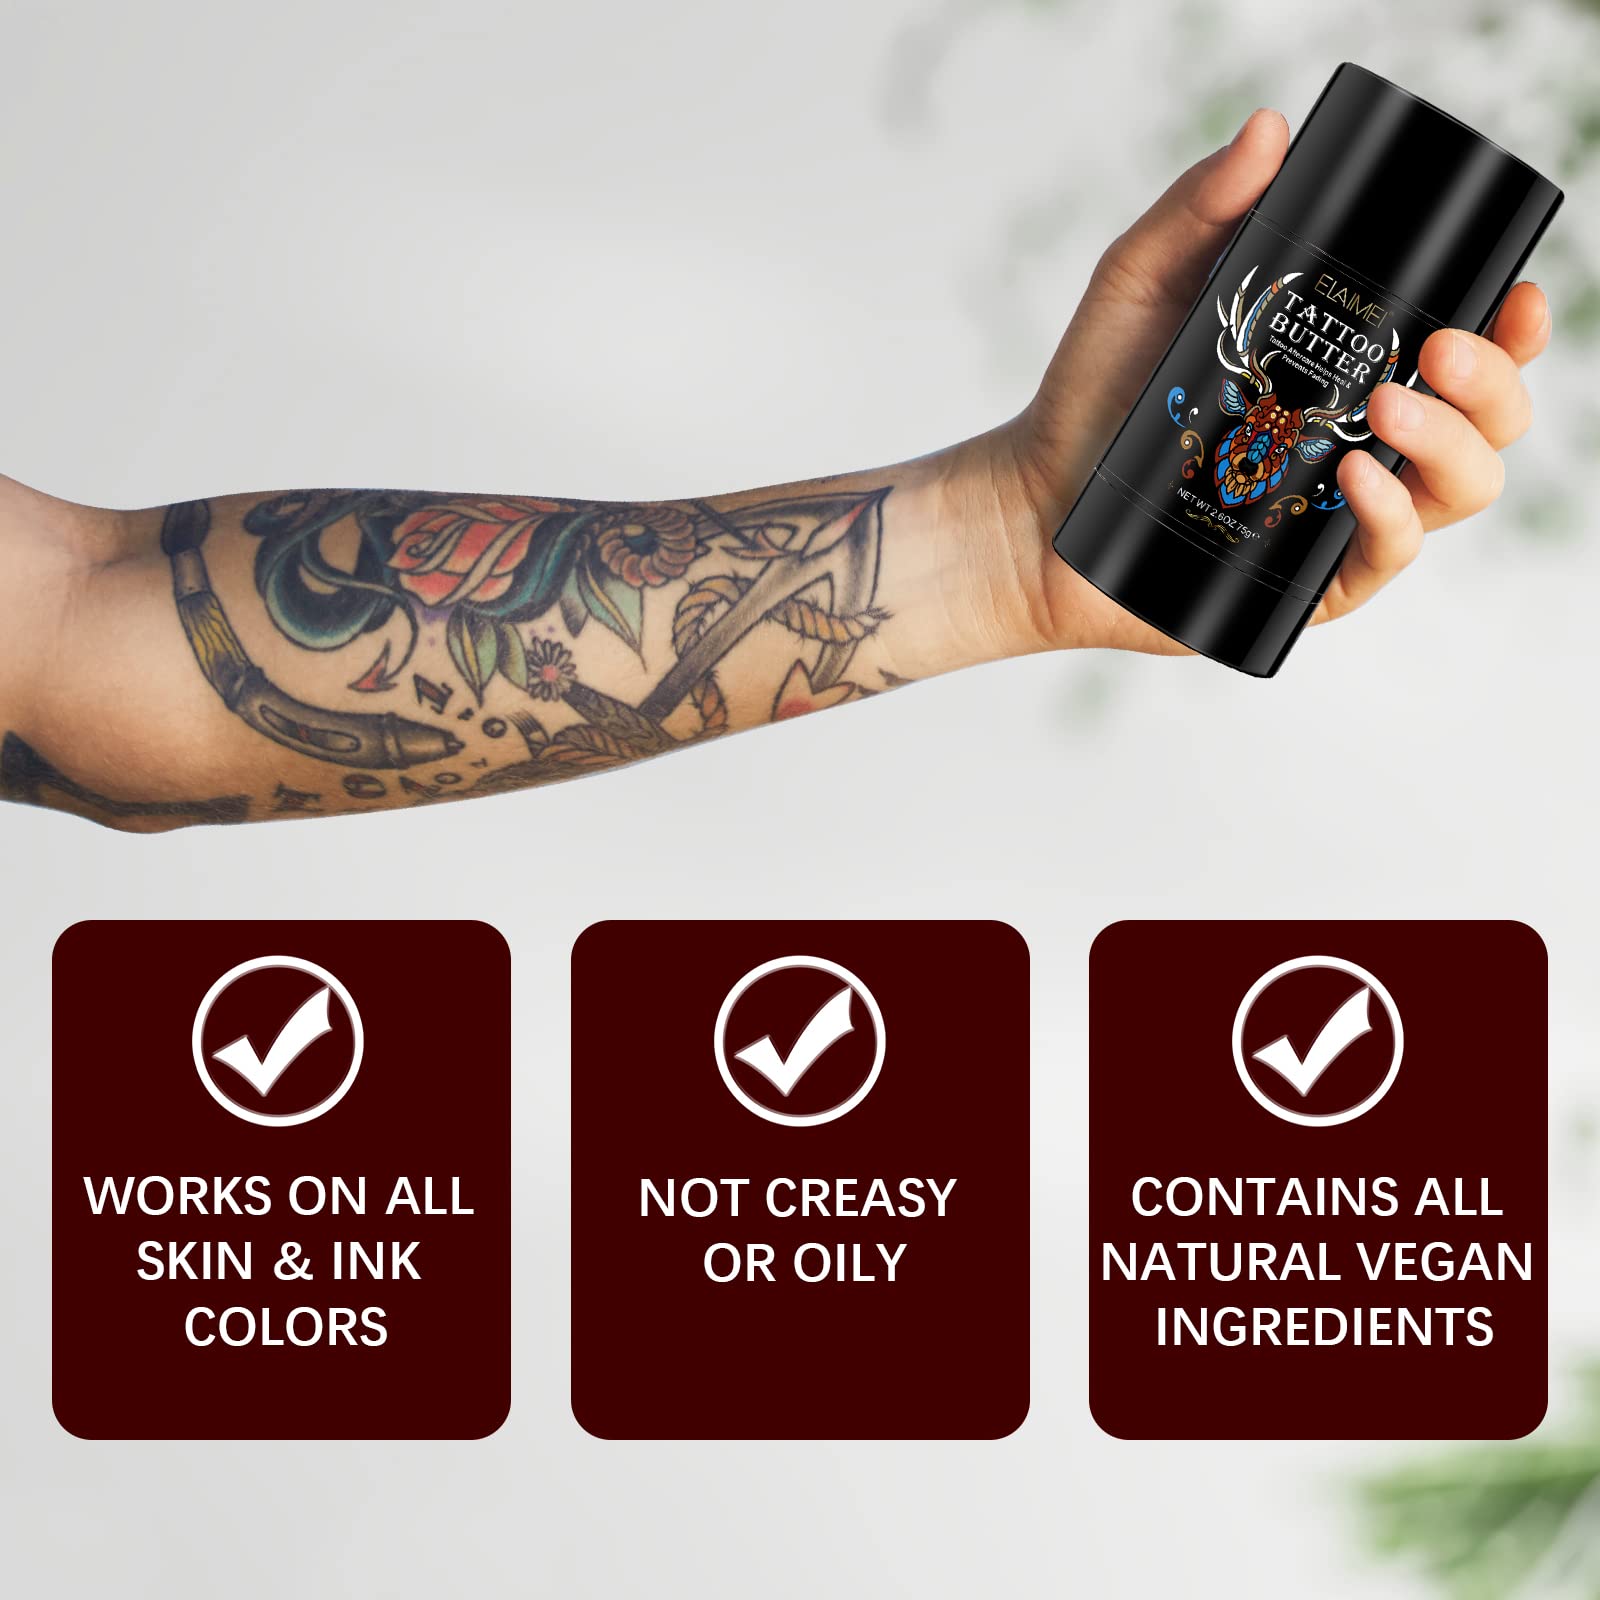 Tattoo Aftercare Butter Balm, 2.6 oz, Old & New Tattoo Moisturizer Healing Brightener for Color Enhance, Natural Organic Tattoo Cream